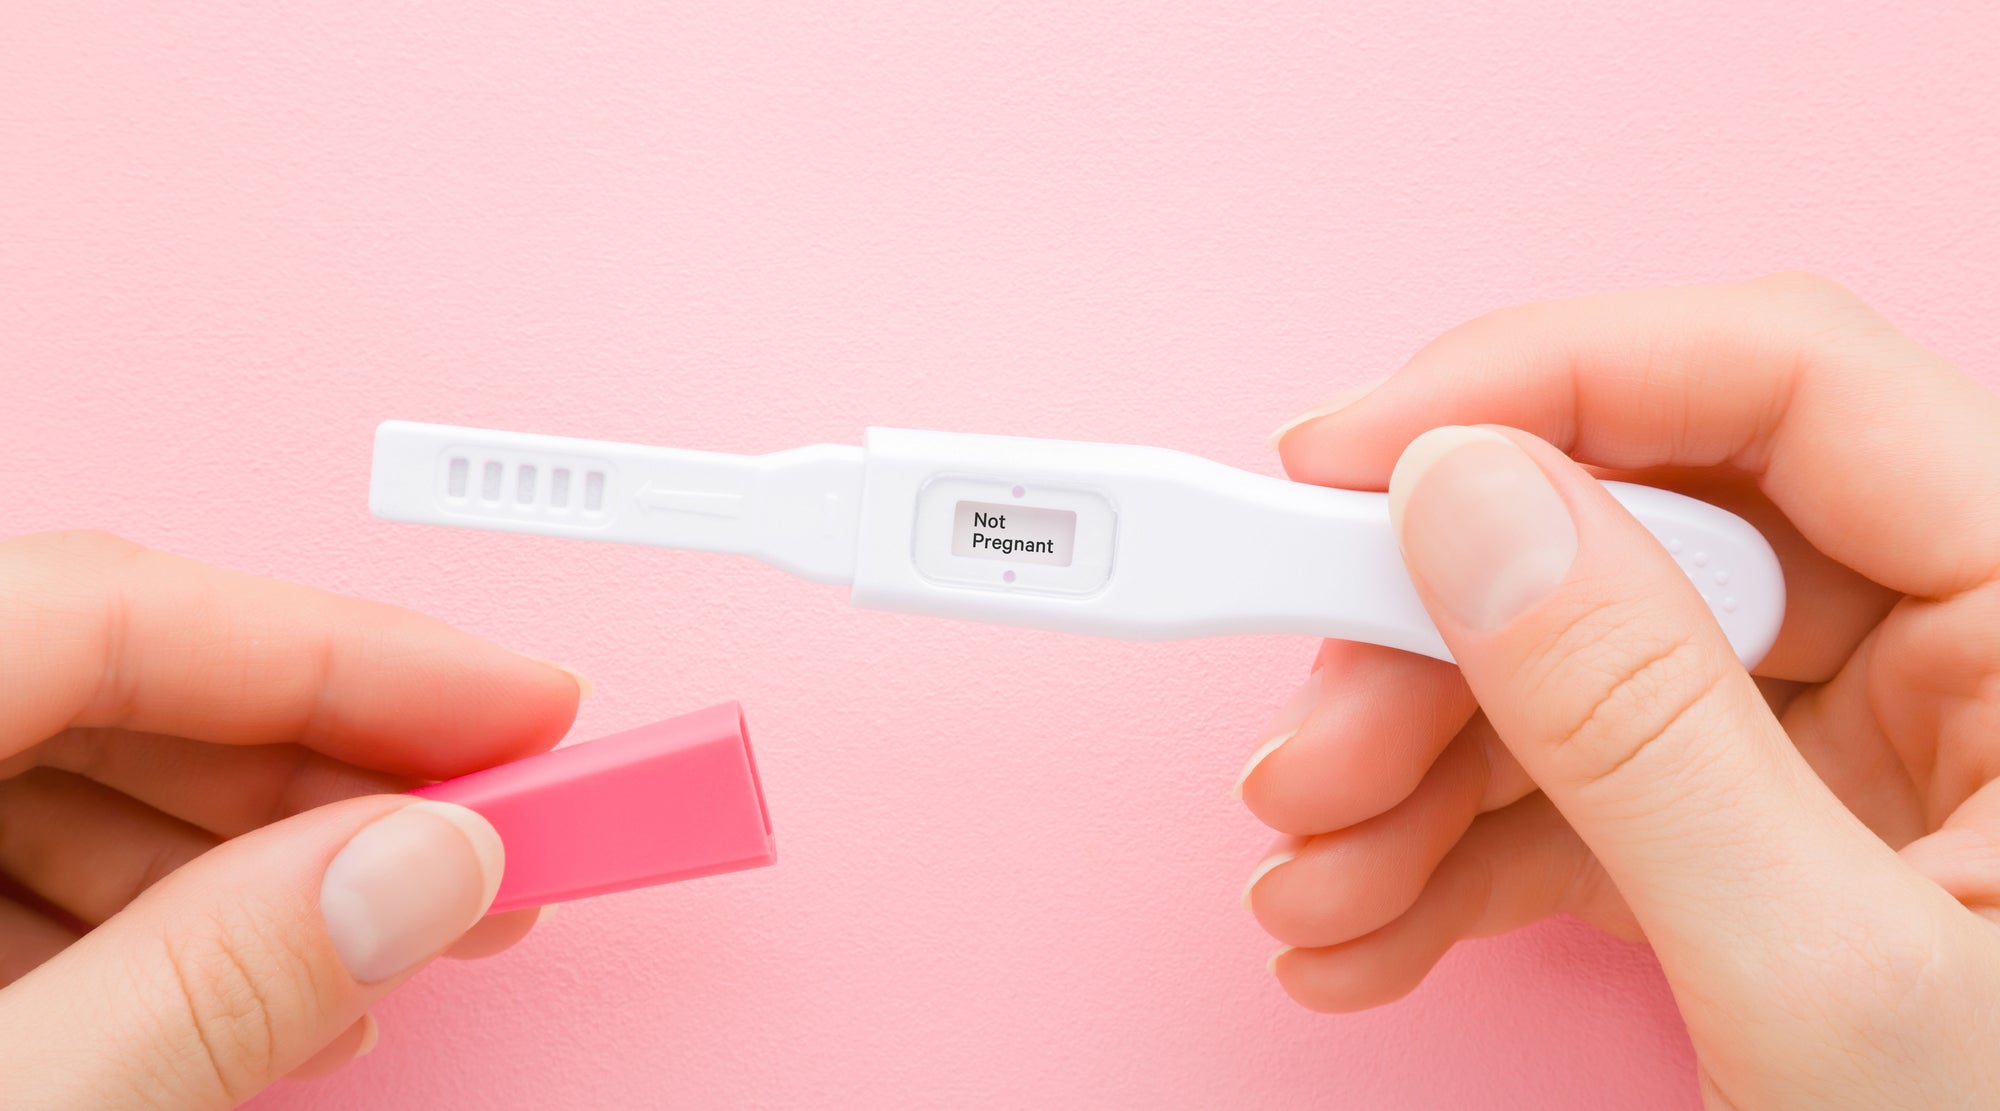 How Common is Female Infertility?